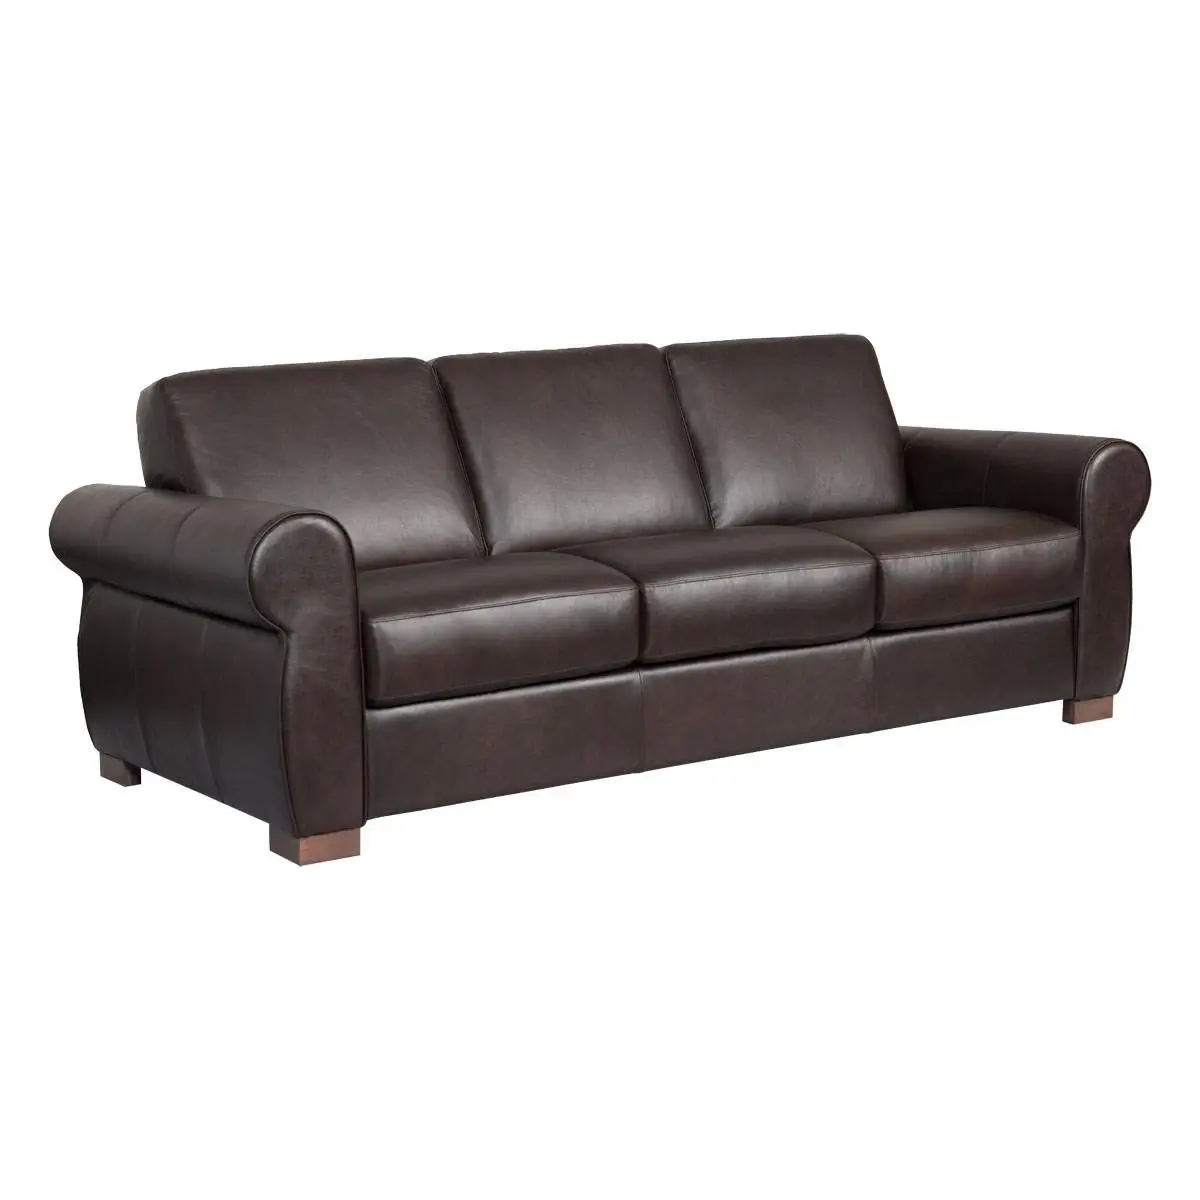 Bergamo Leather Sofa Brown Queen, Brown Leather Couch Sleeper